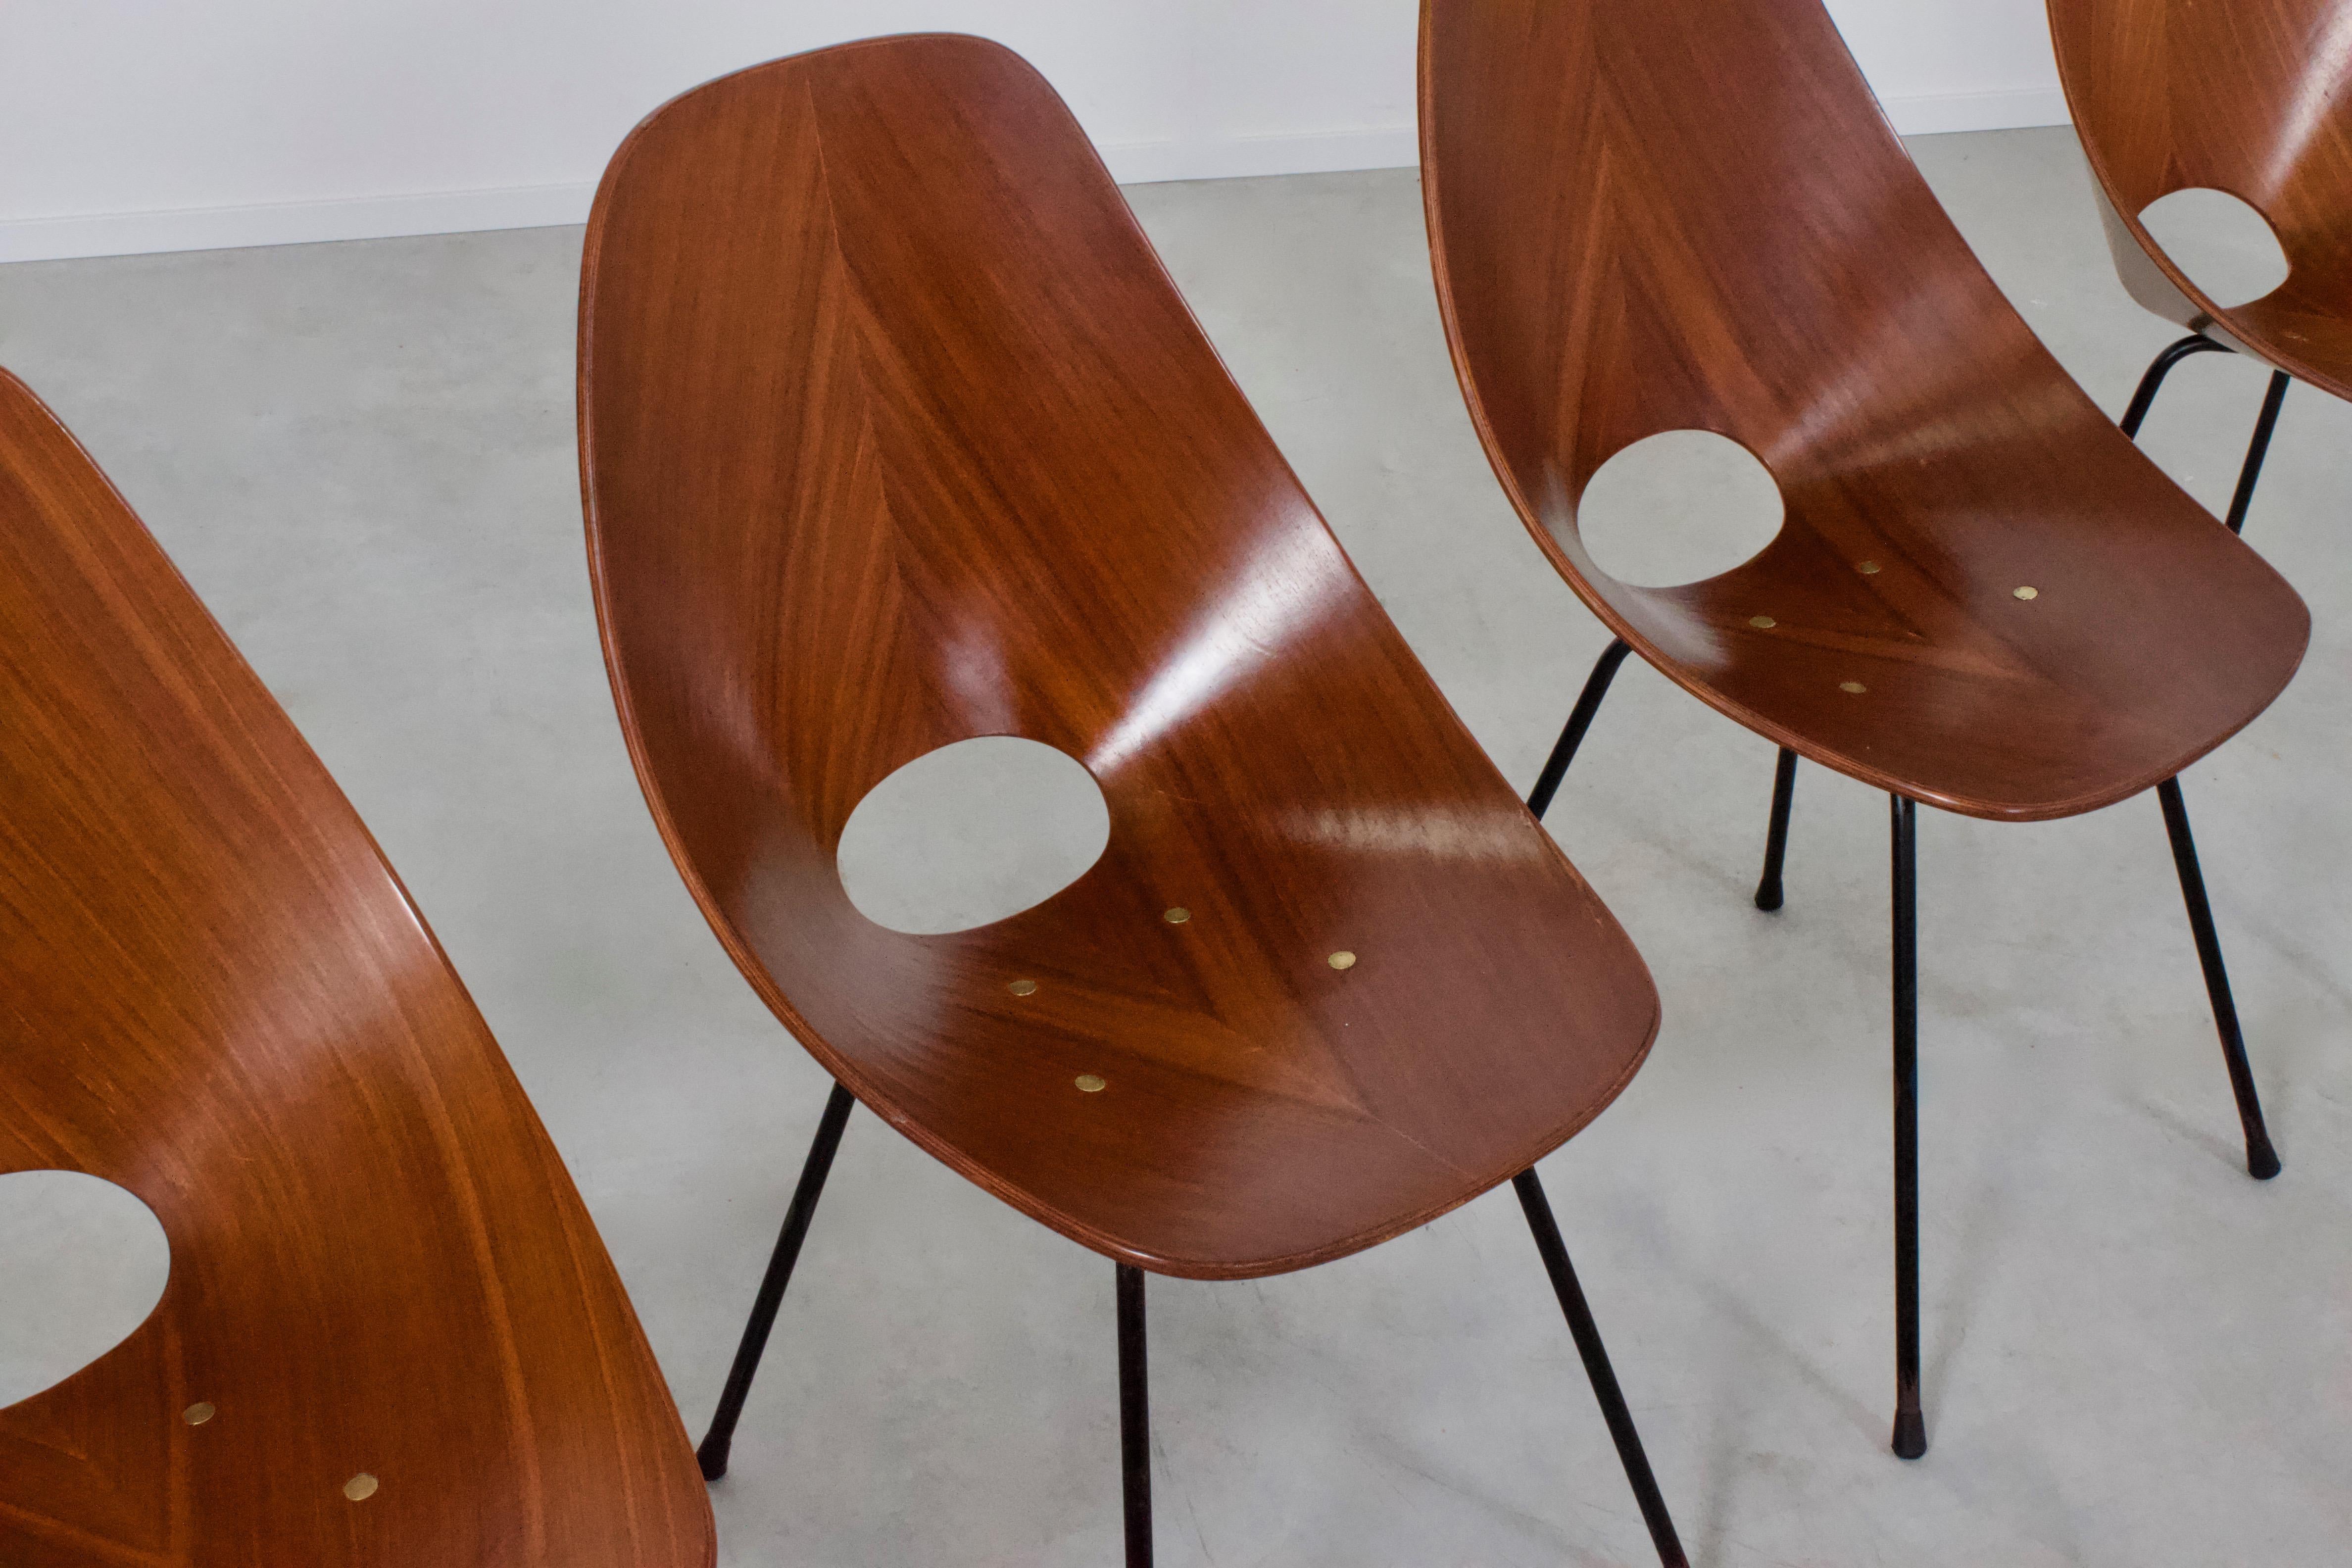 Lacquered 4 Plywood Vittorio Nobili ‘Medea’ Chairs, Italy, 1955